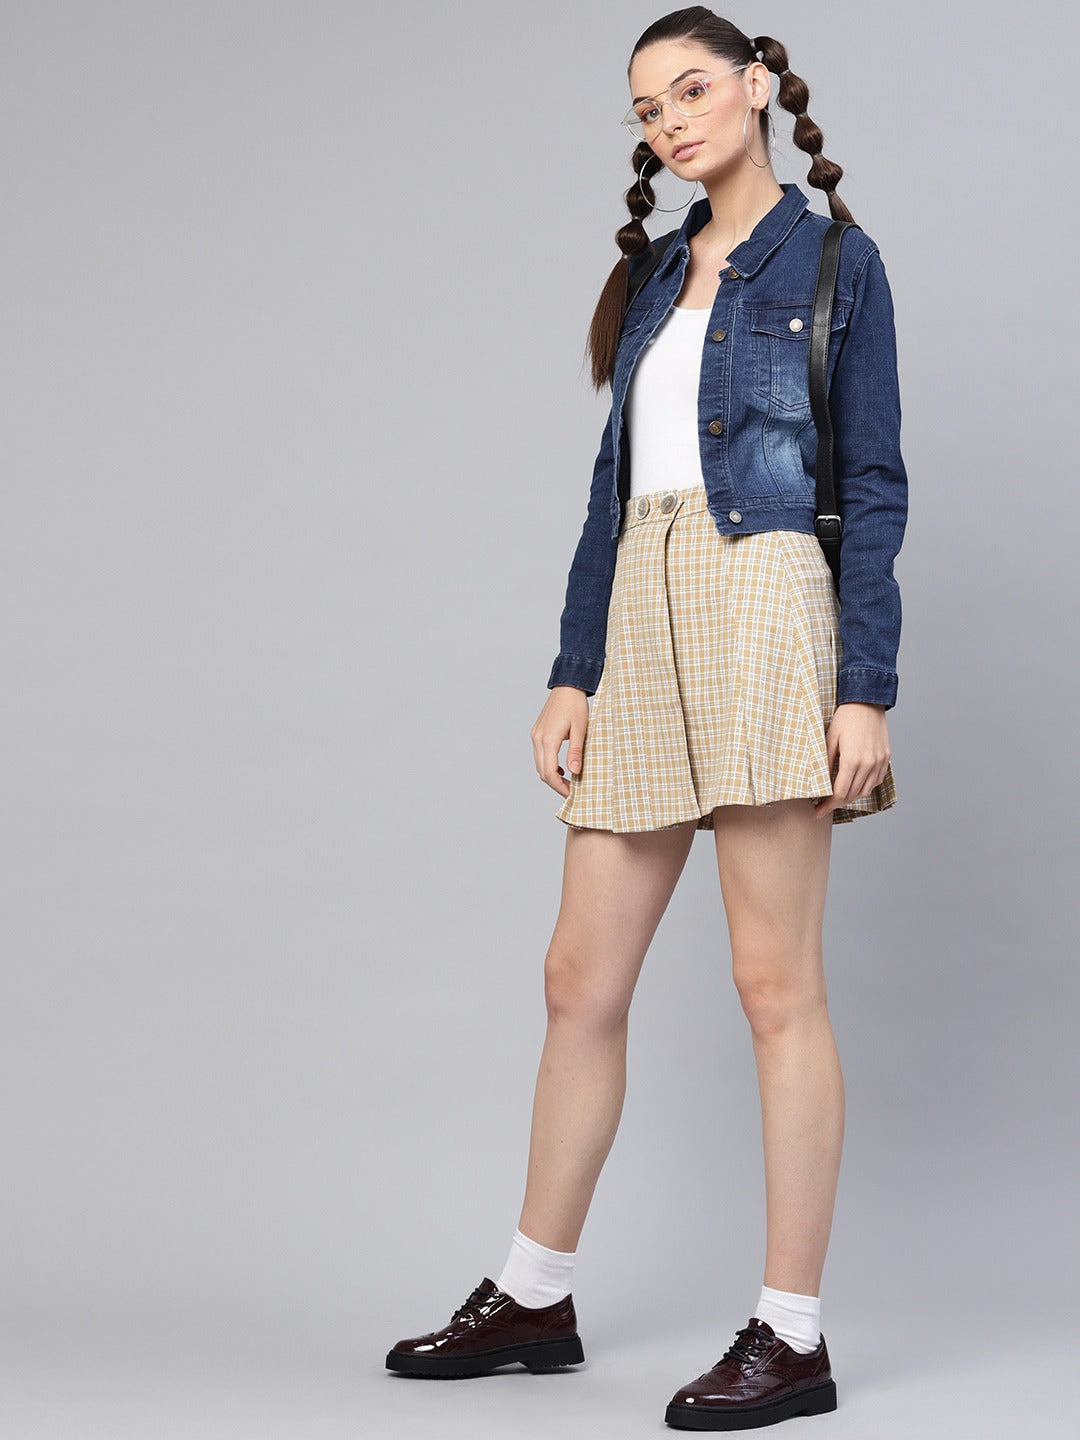 Stylish women's denim jacket with pleated skirt and platform shoes, showcasing a trendy casual outfit.